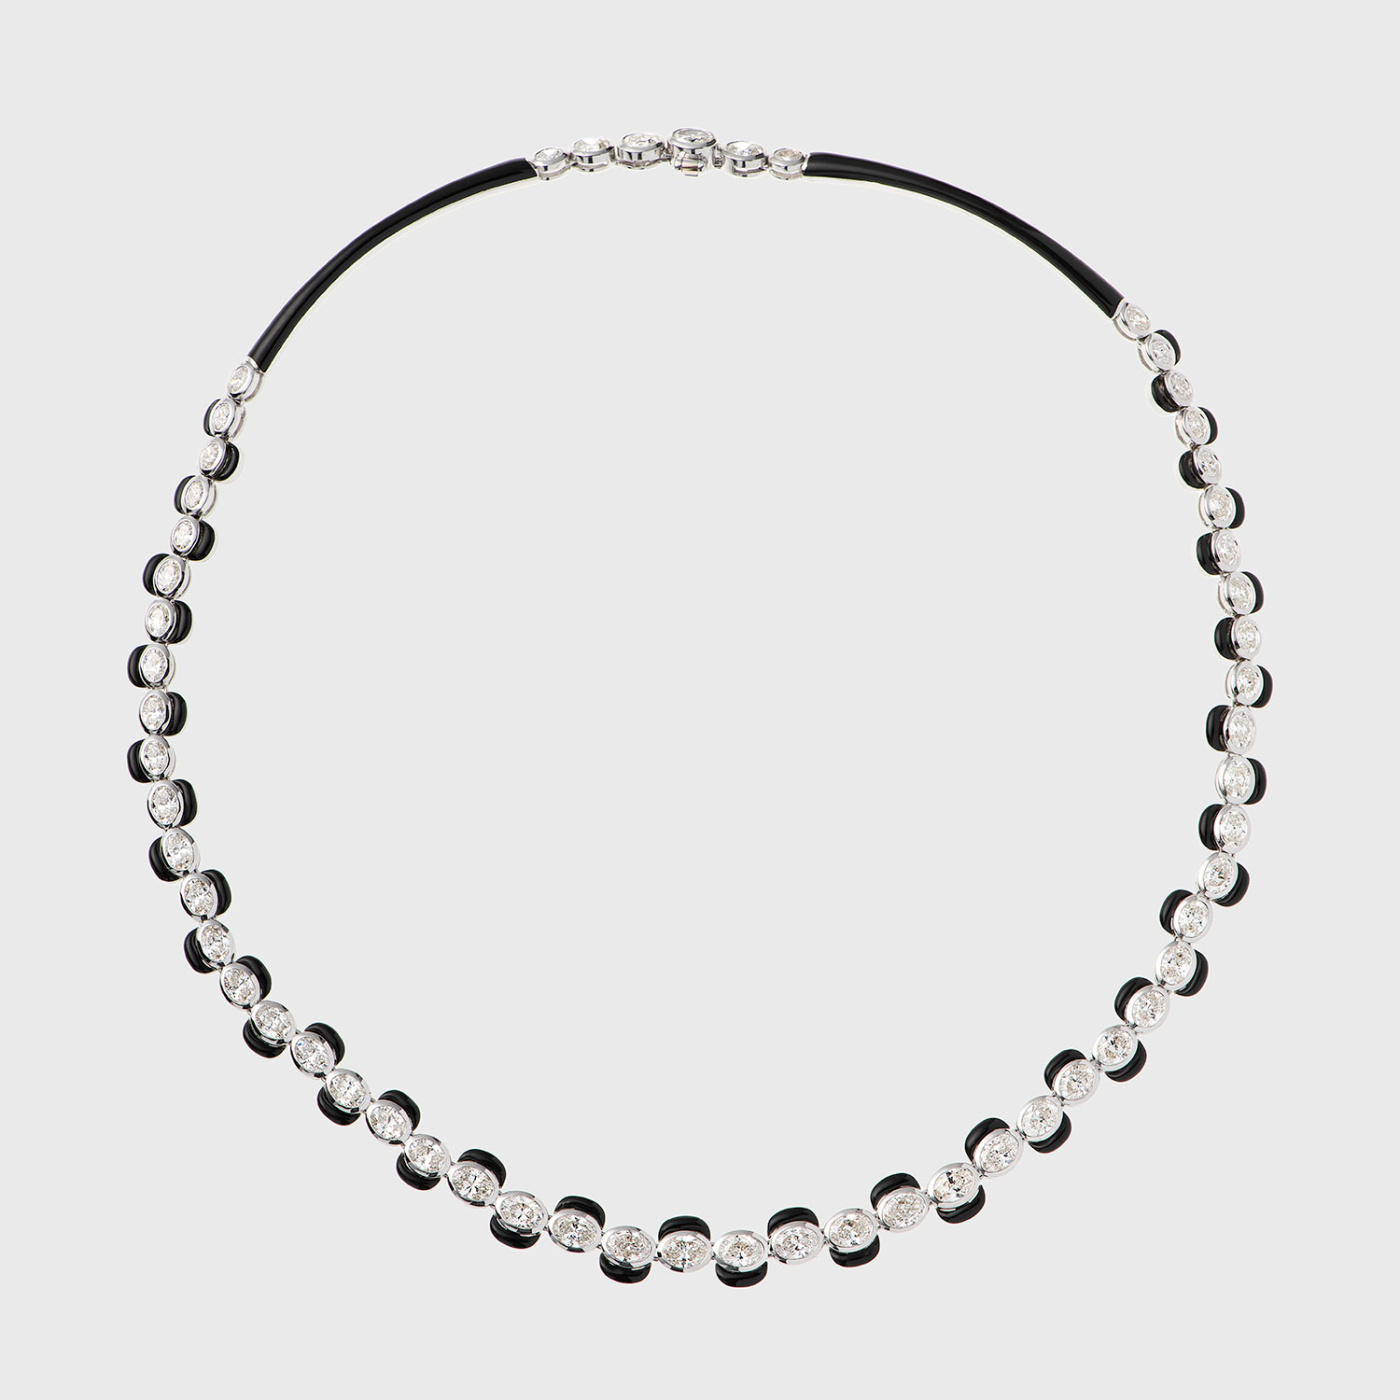 White gold riviere necklace with oval white diamonds and black enamel